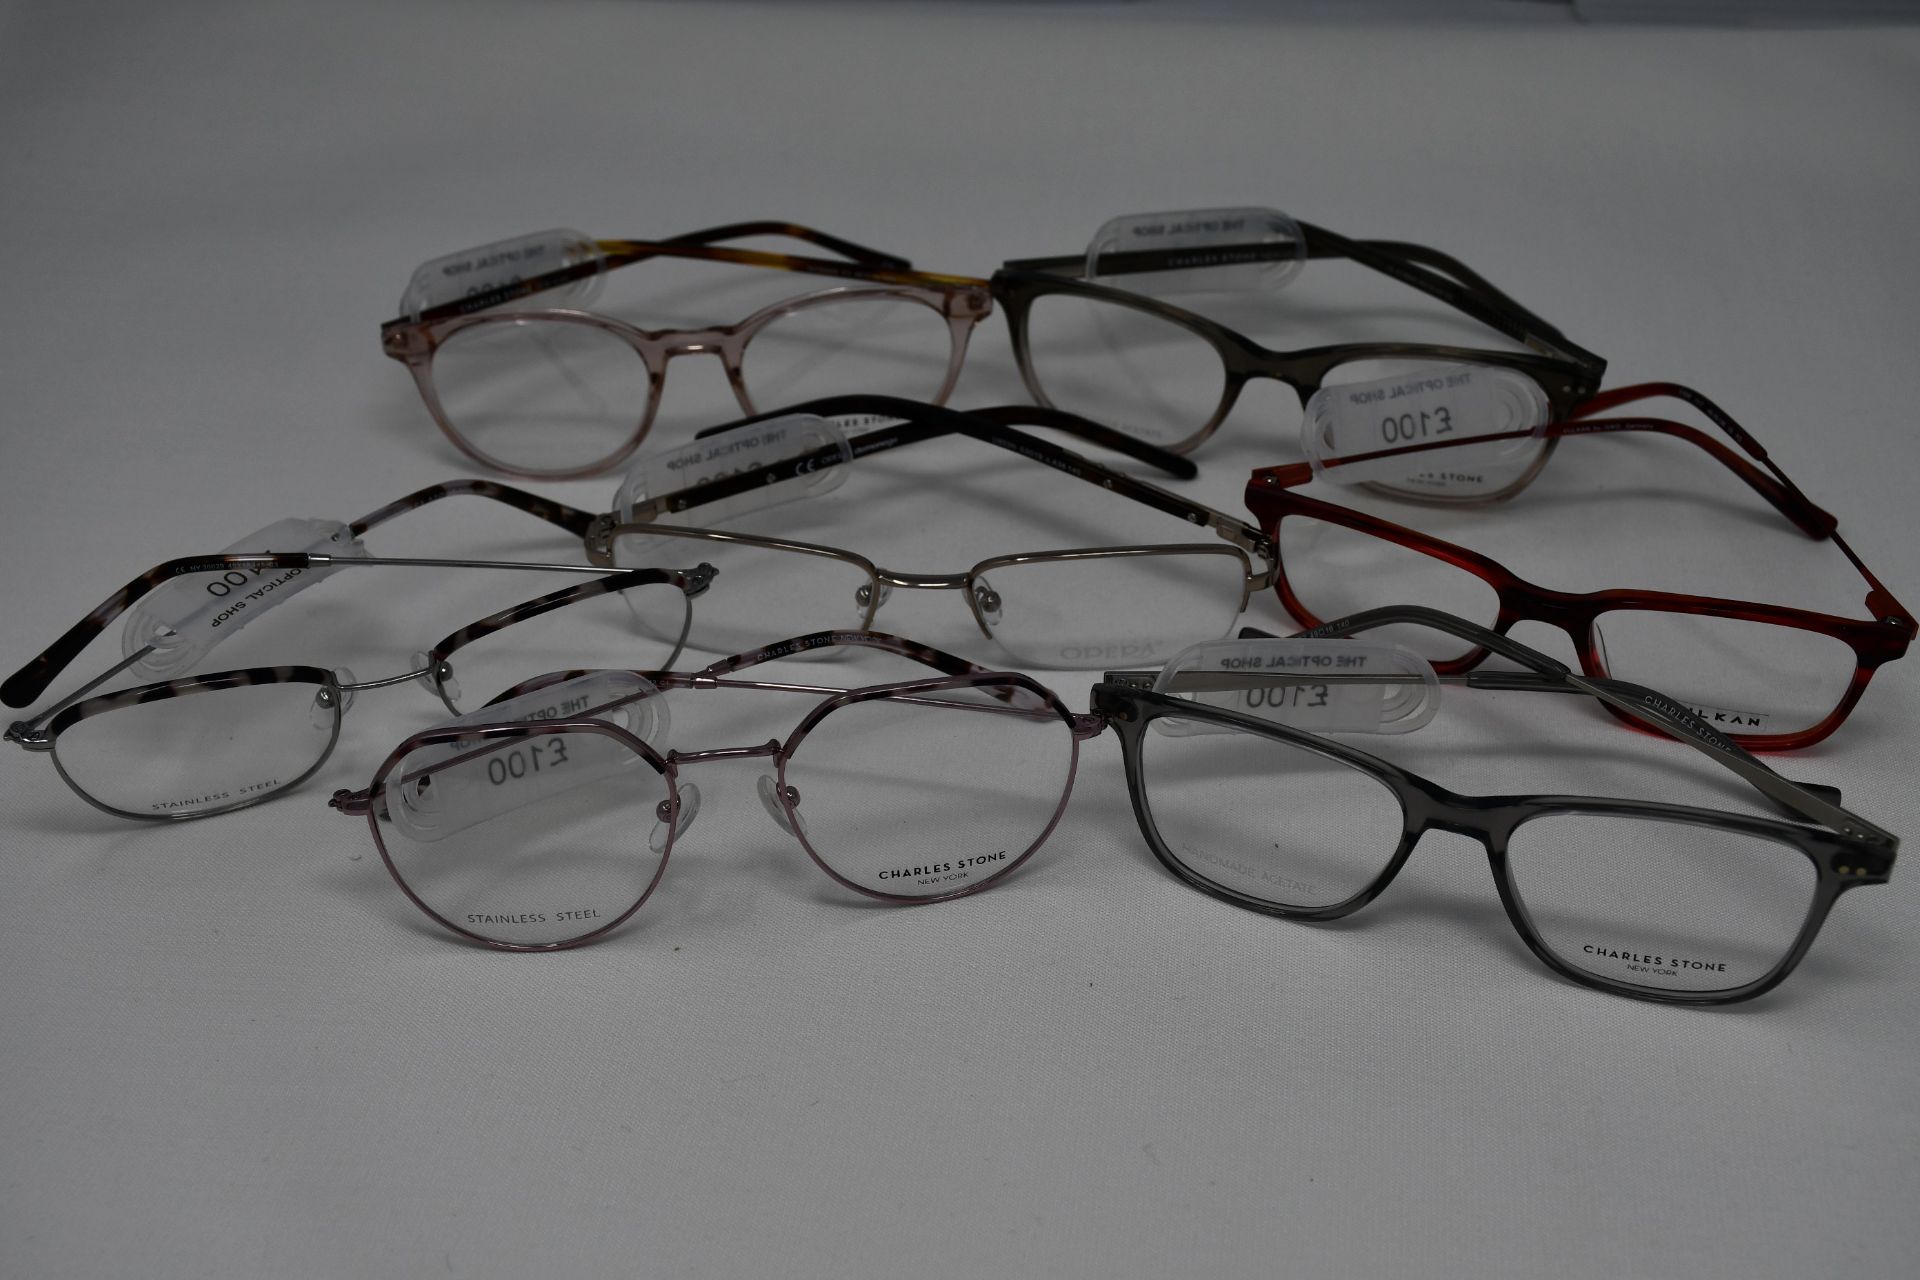 Seven pairs of as new glasses frames with clear glass to include Charles Stone, Vulkan and Opera (